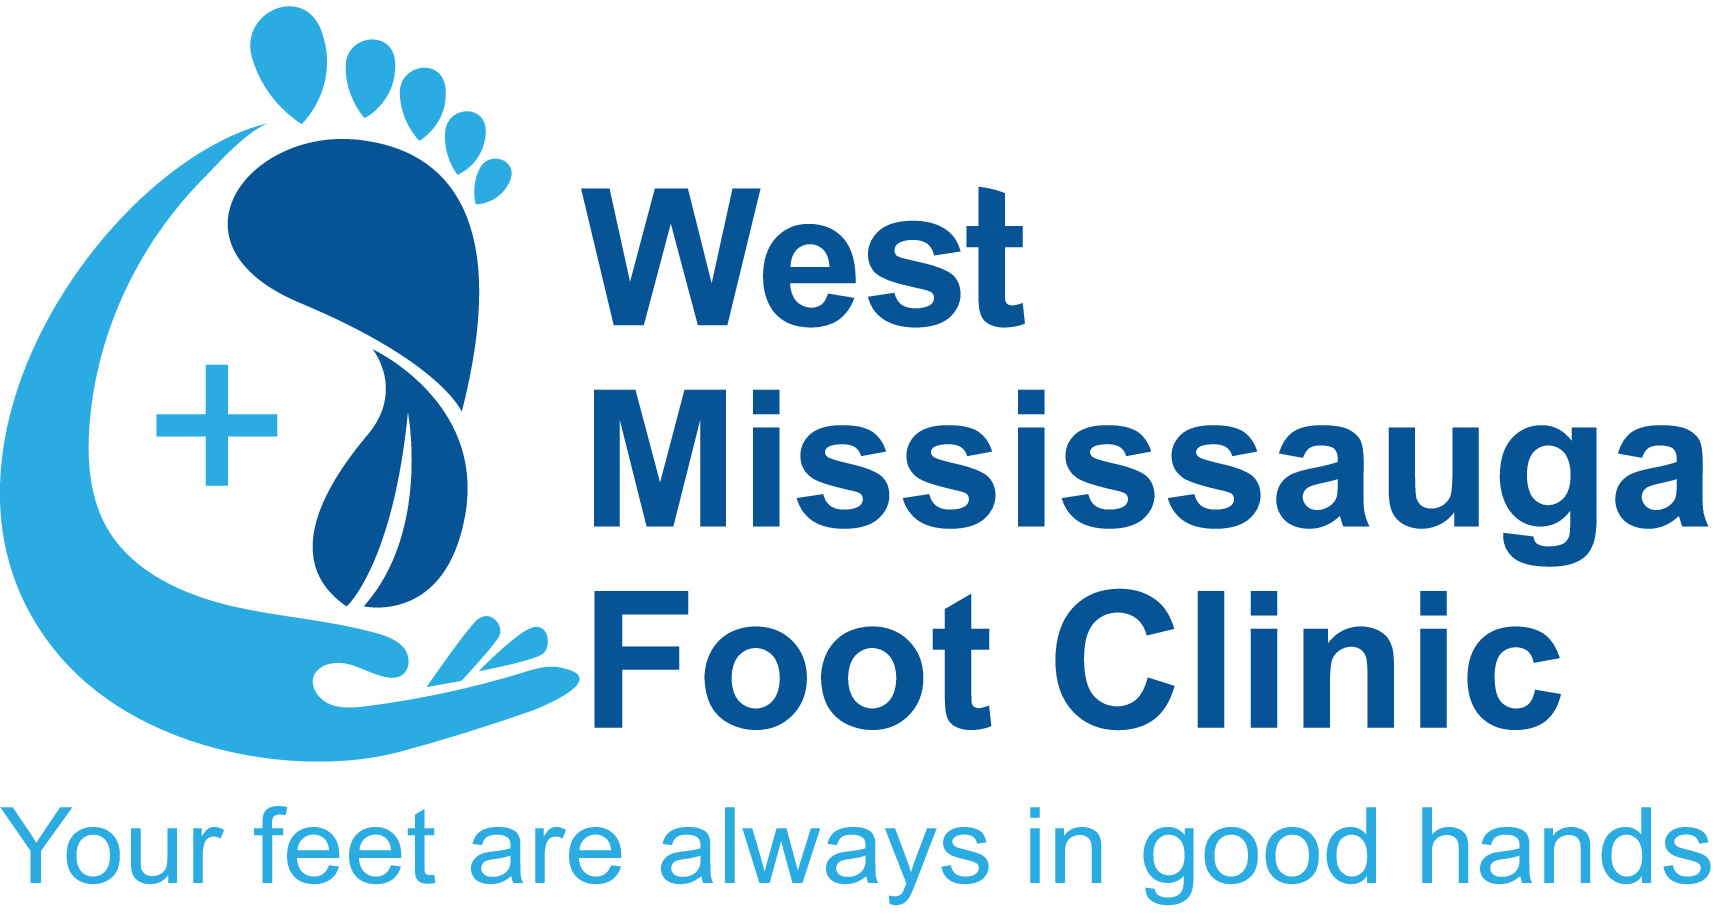 West Mississauga Foot Clinic